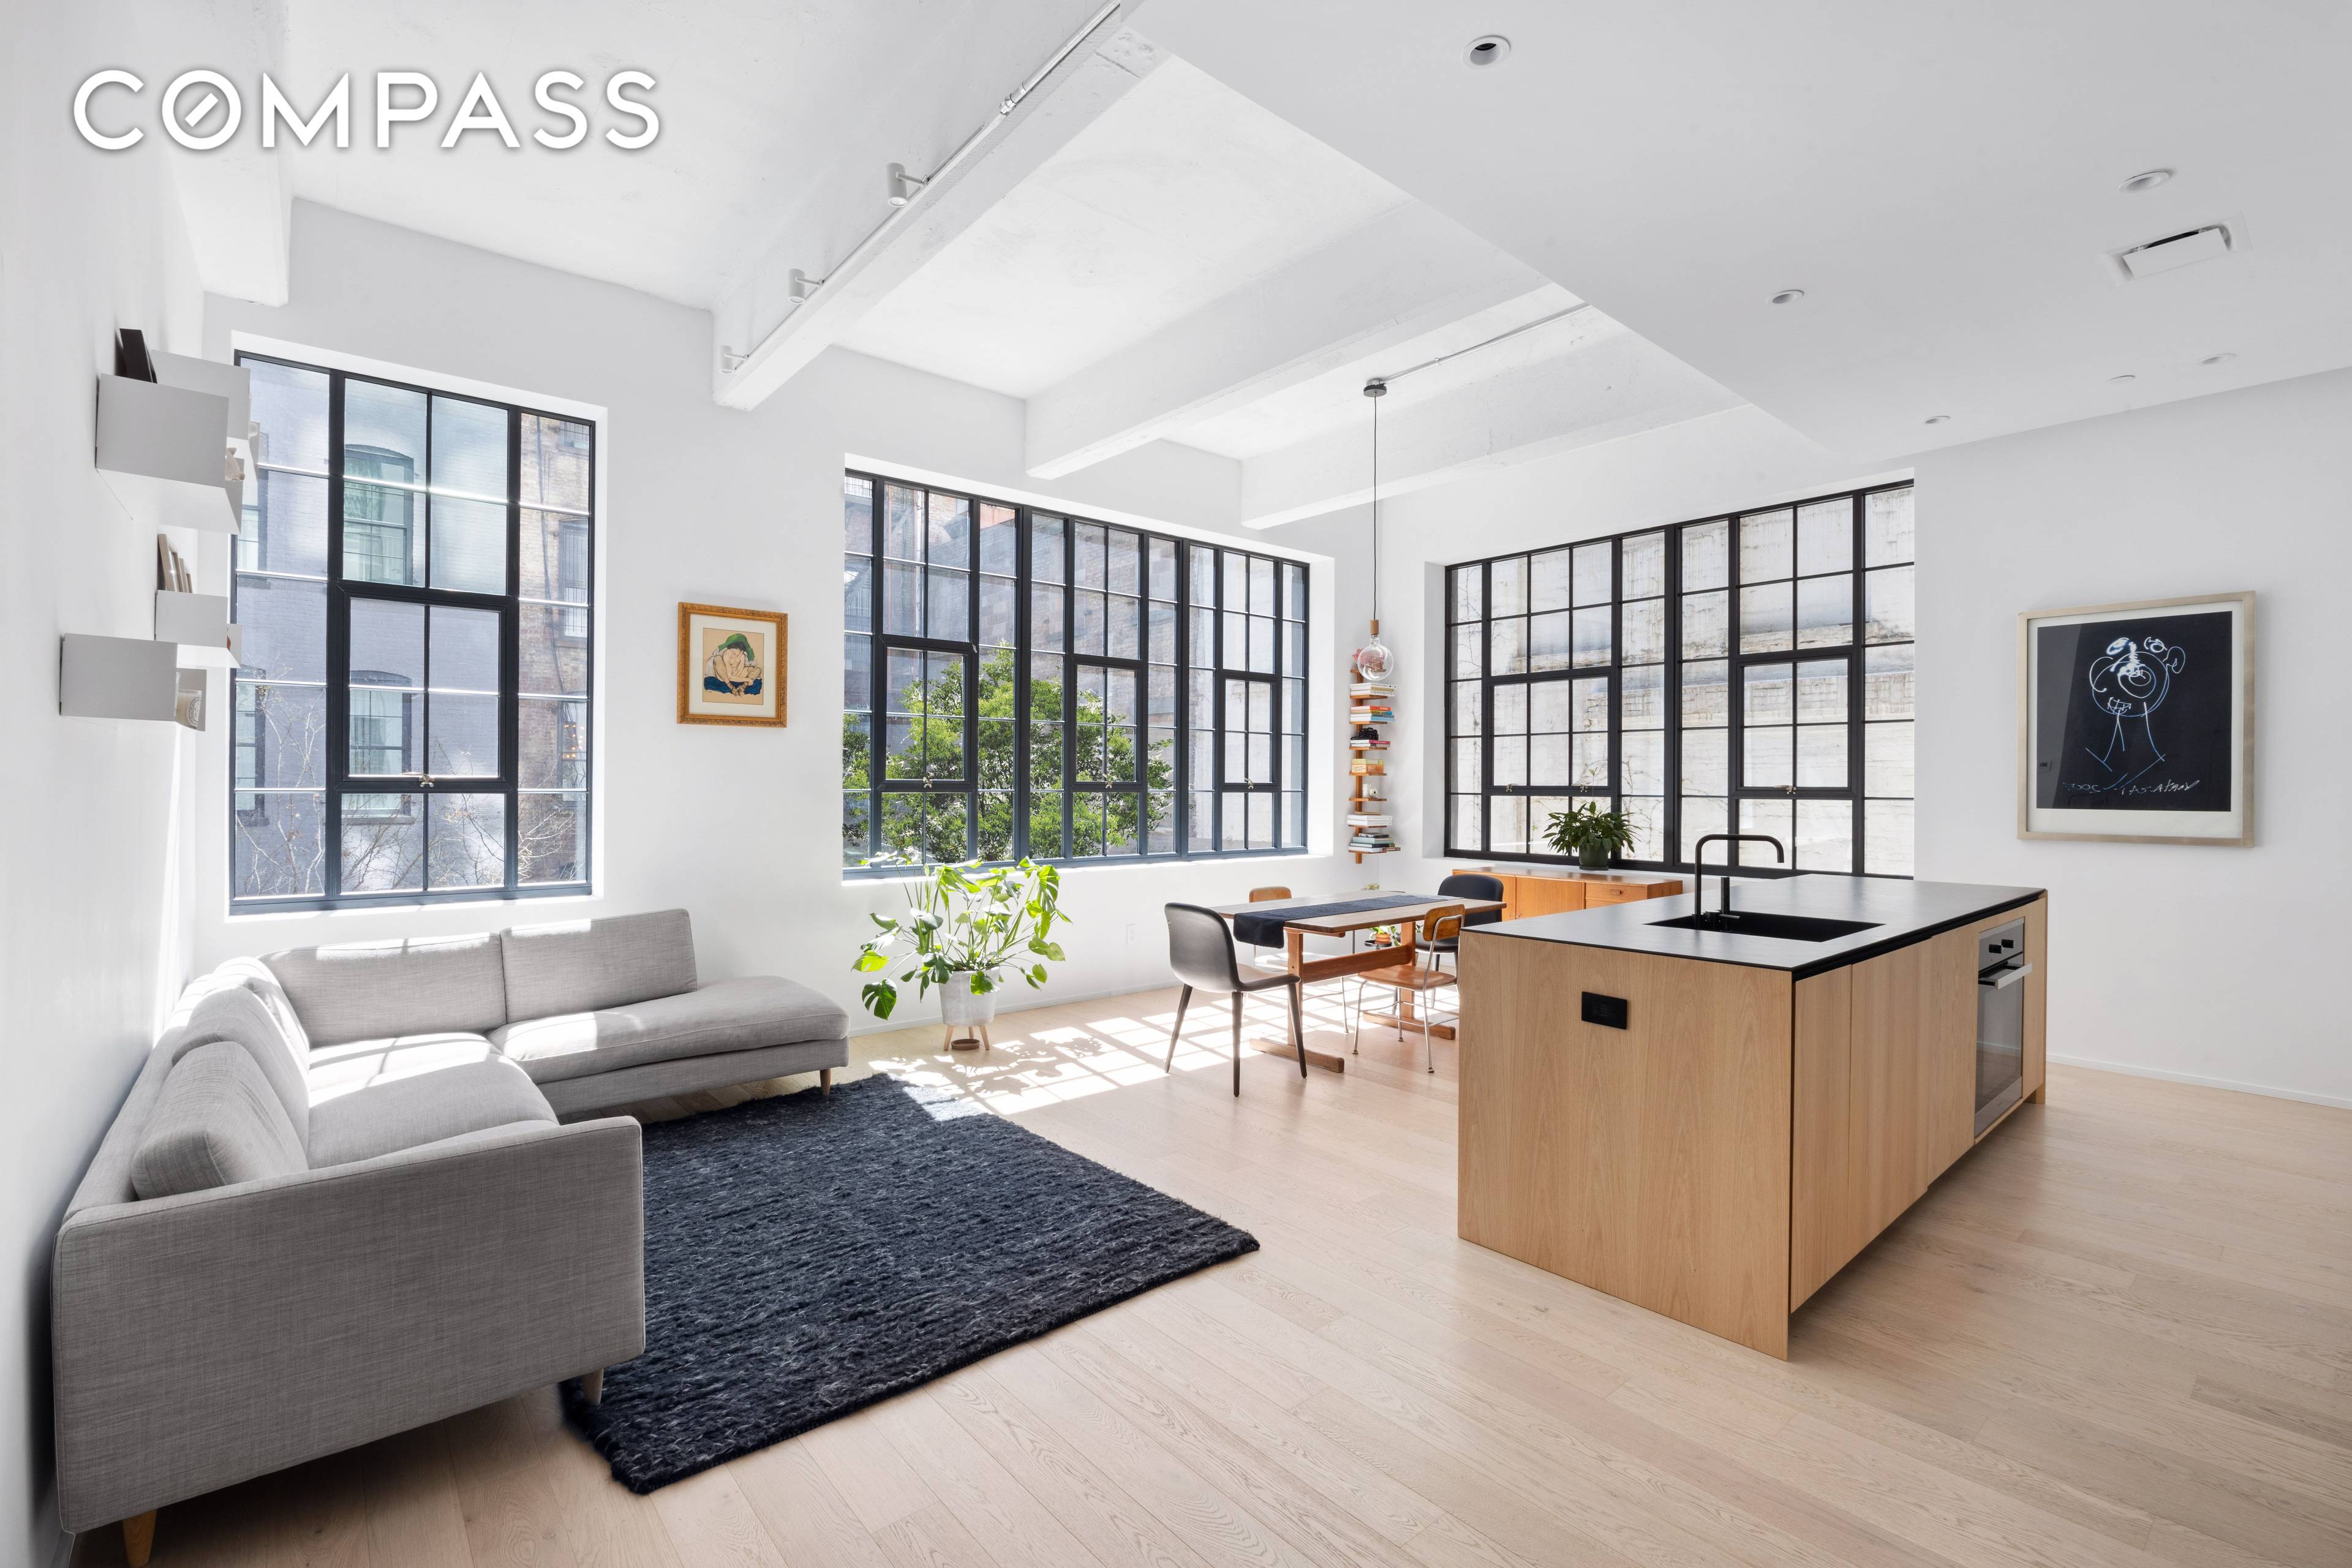 Welcome to 168 Plymouth Street, a stunning loft residence that combines contemporary style with historic charm.